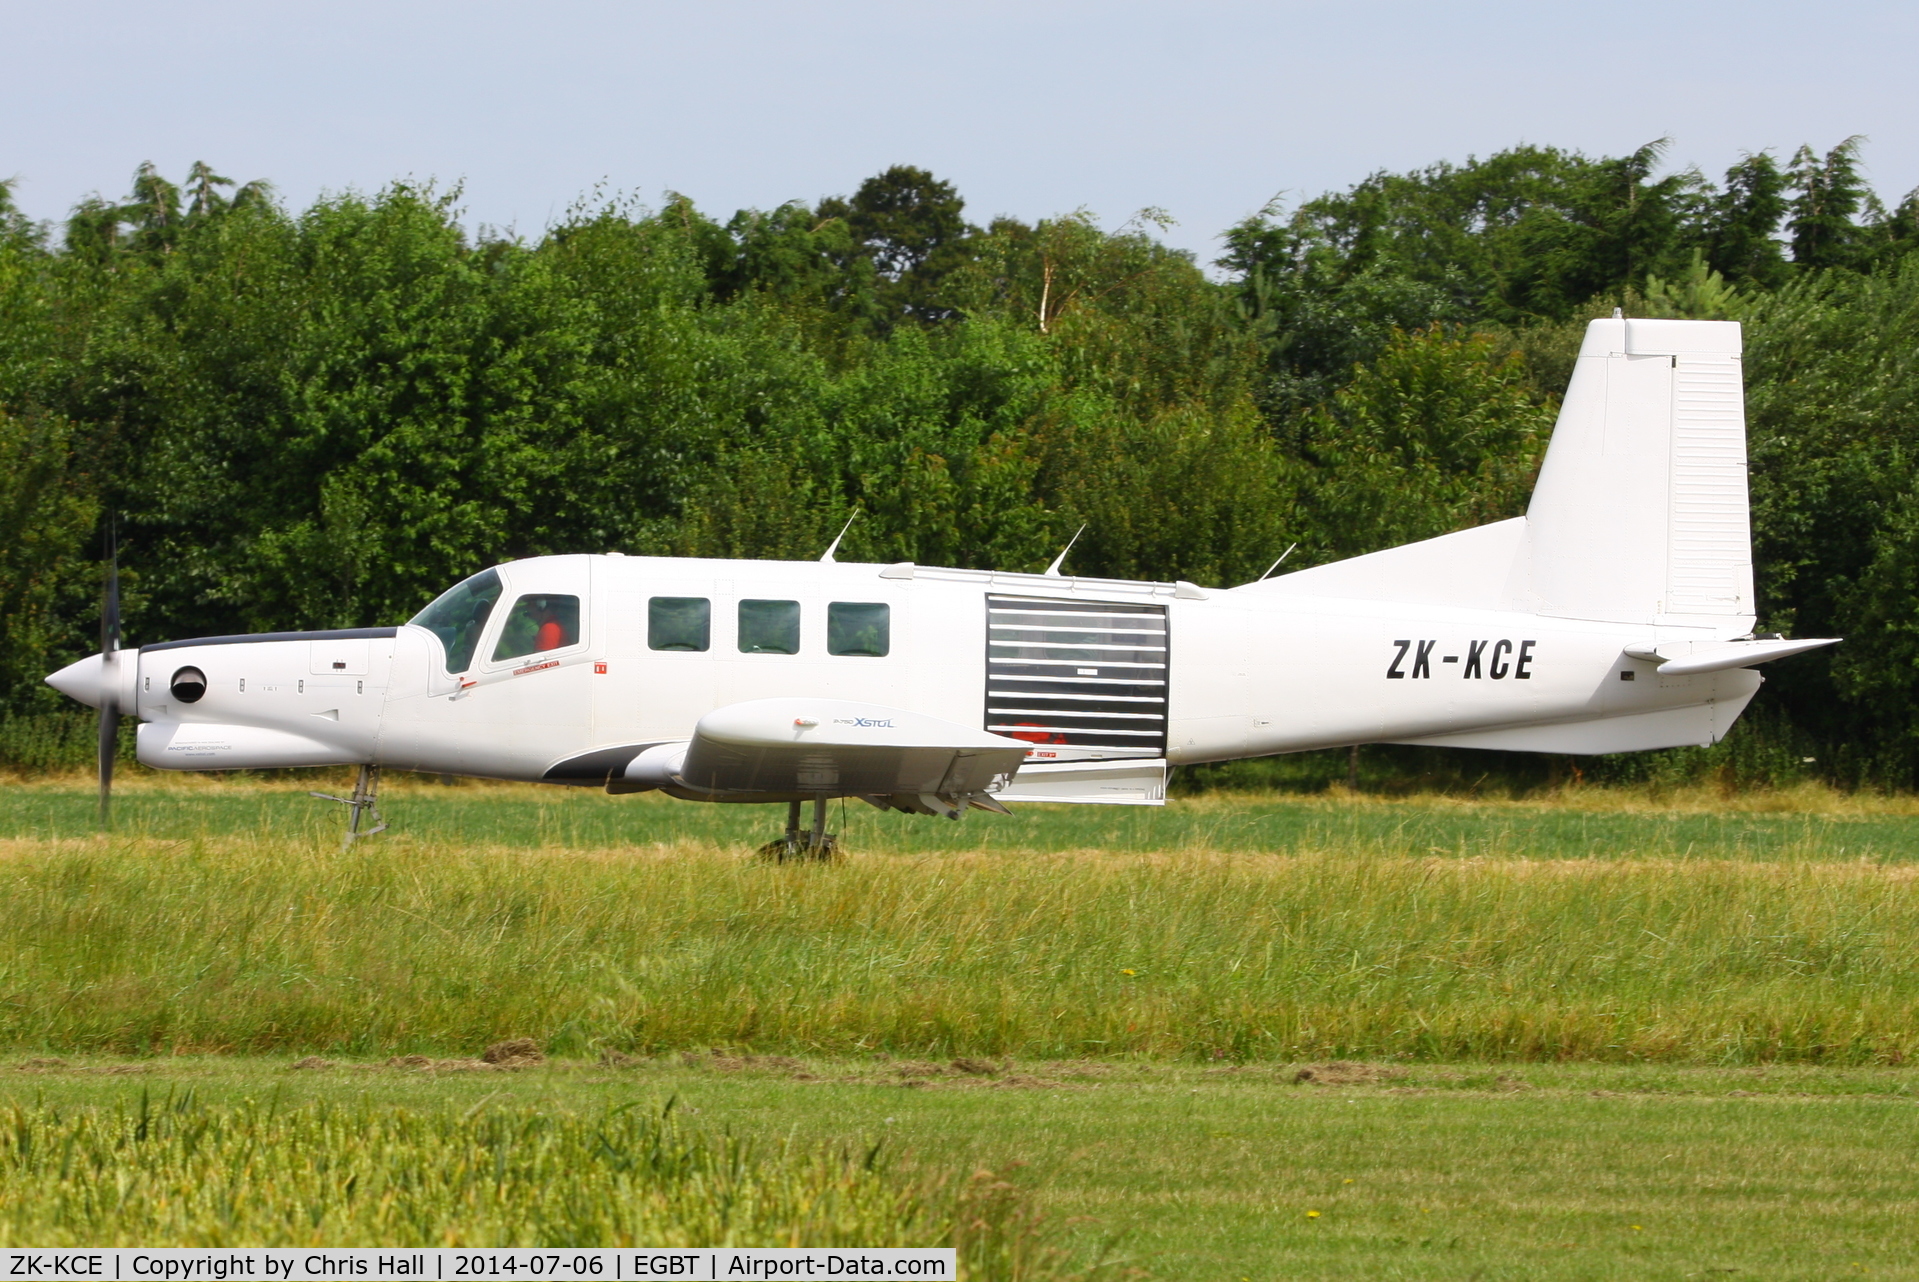 ZK-KCE, 2012 Pacific Aerospace 750XL C/N 185, departing back to Hinton in the Hedges